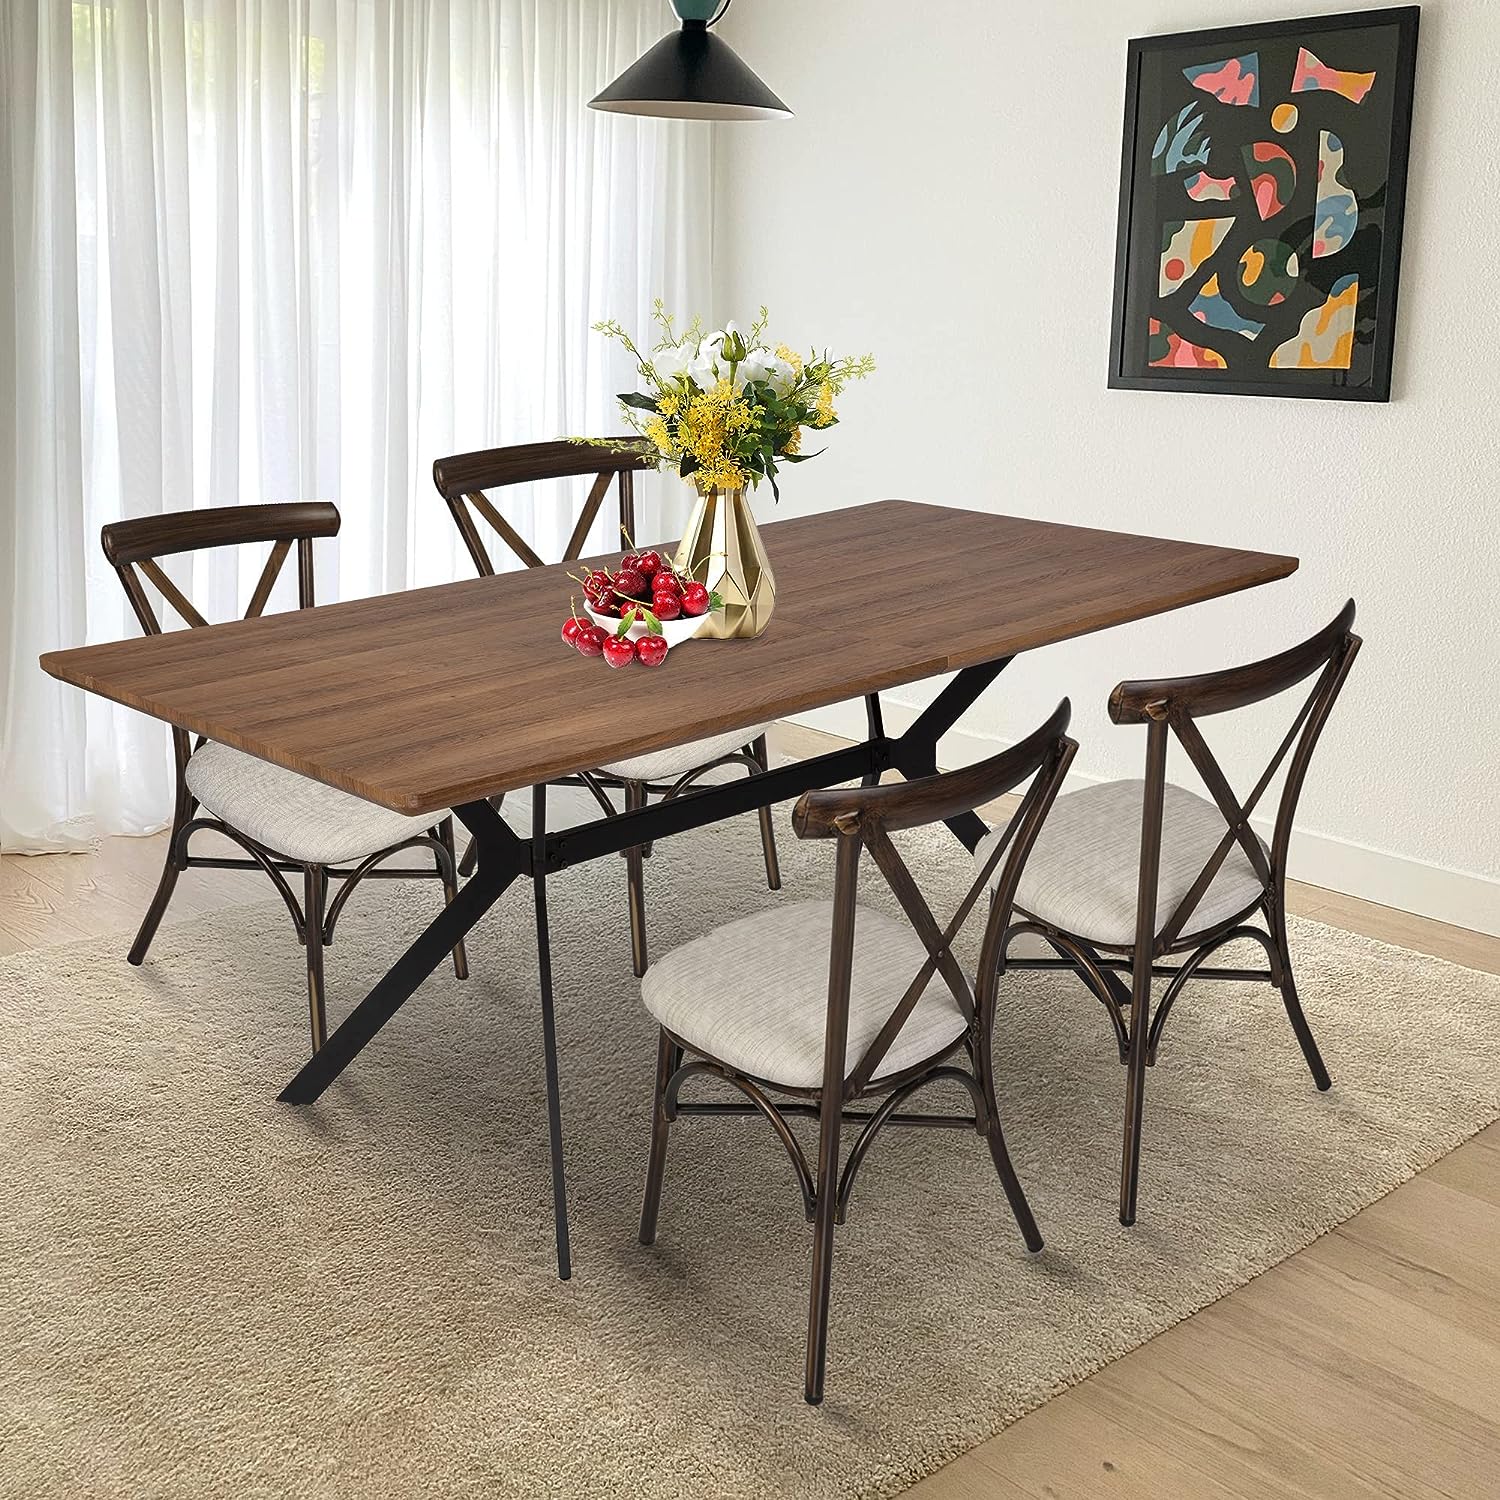 71"x 35.5" Modern Dining Table for 6-8 Kitchen Table with Metal Legs, Base Only